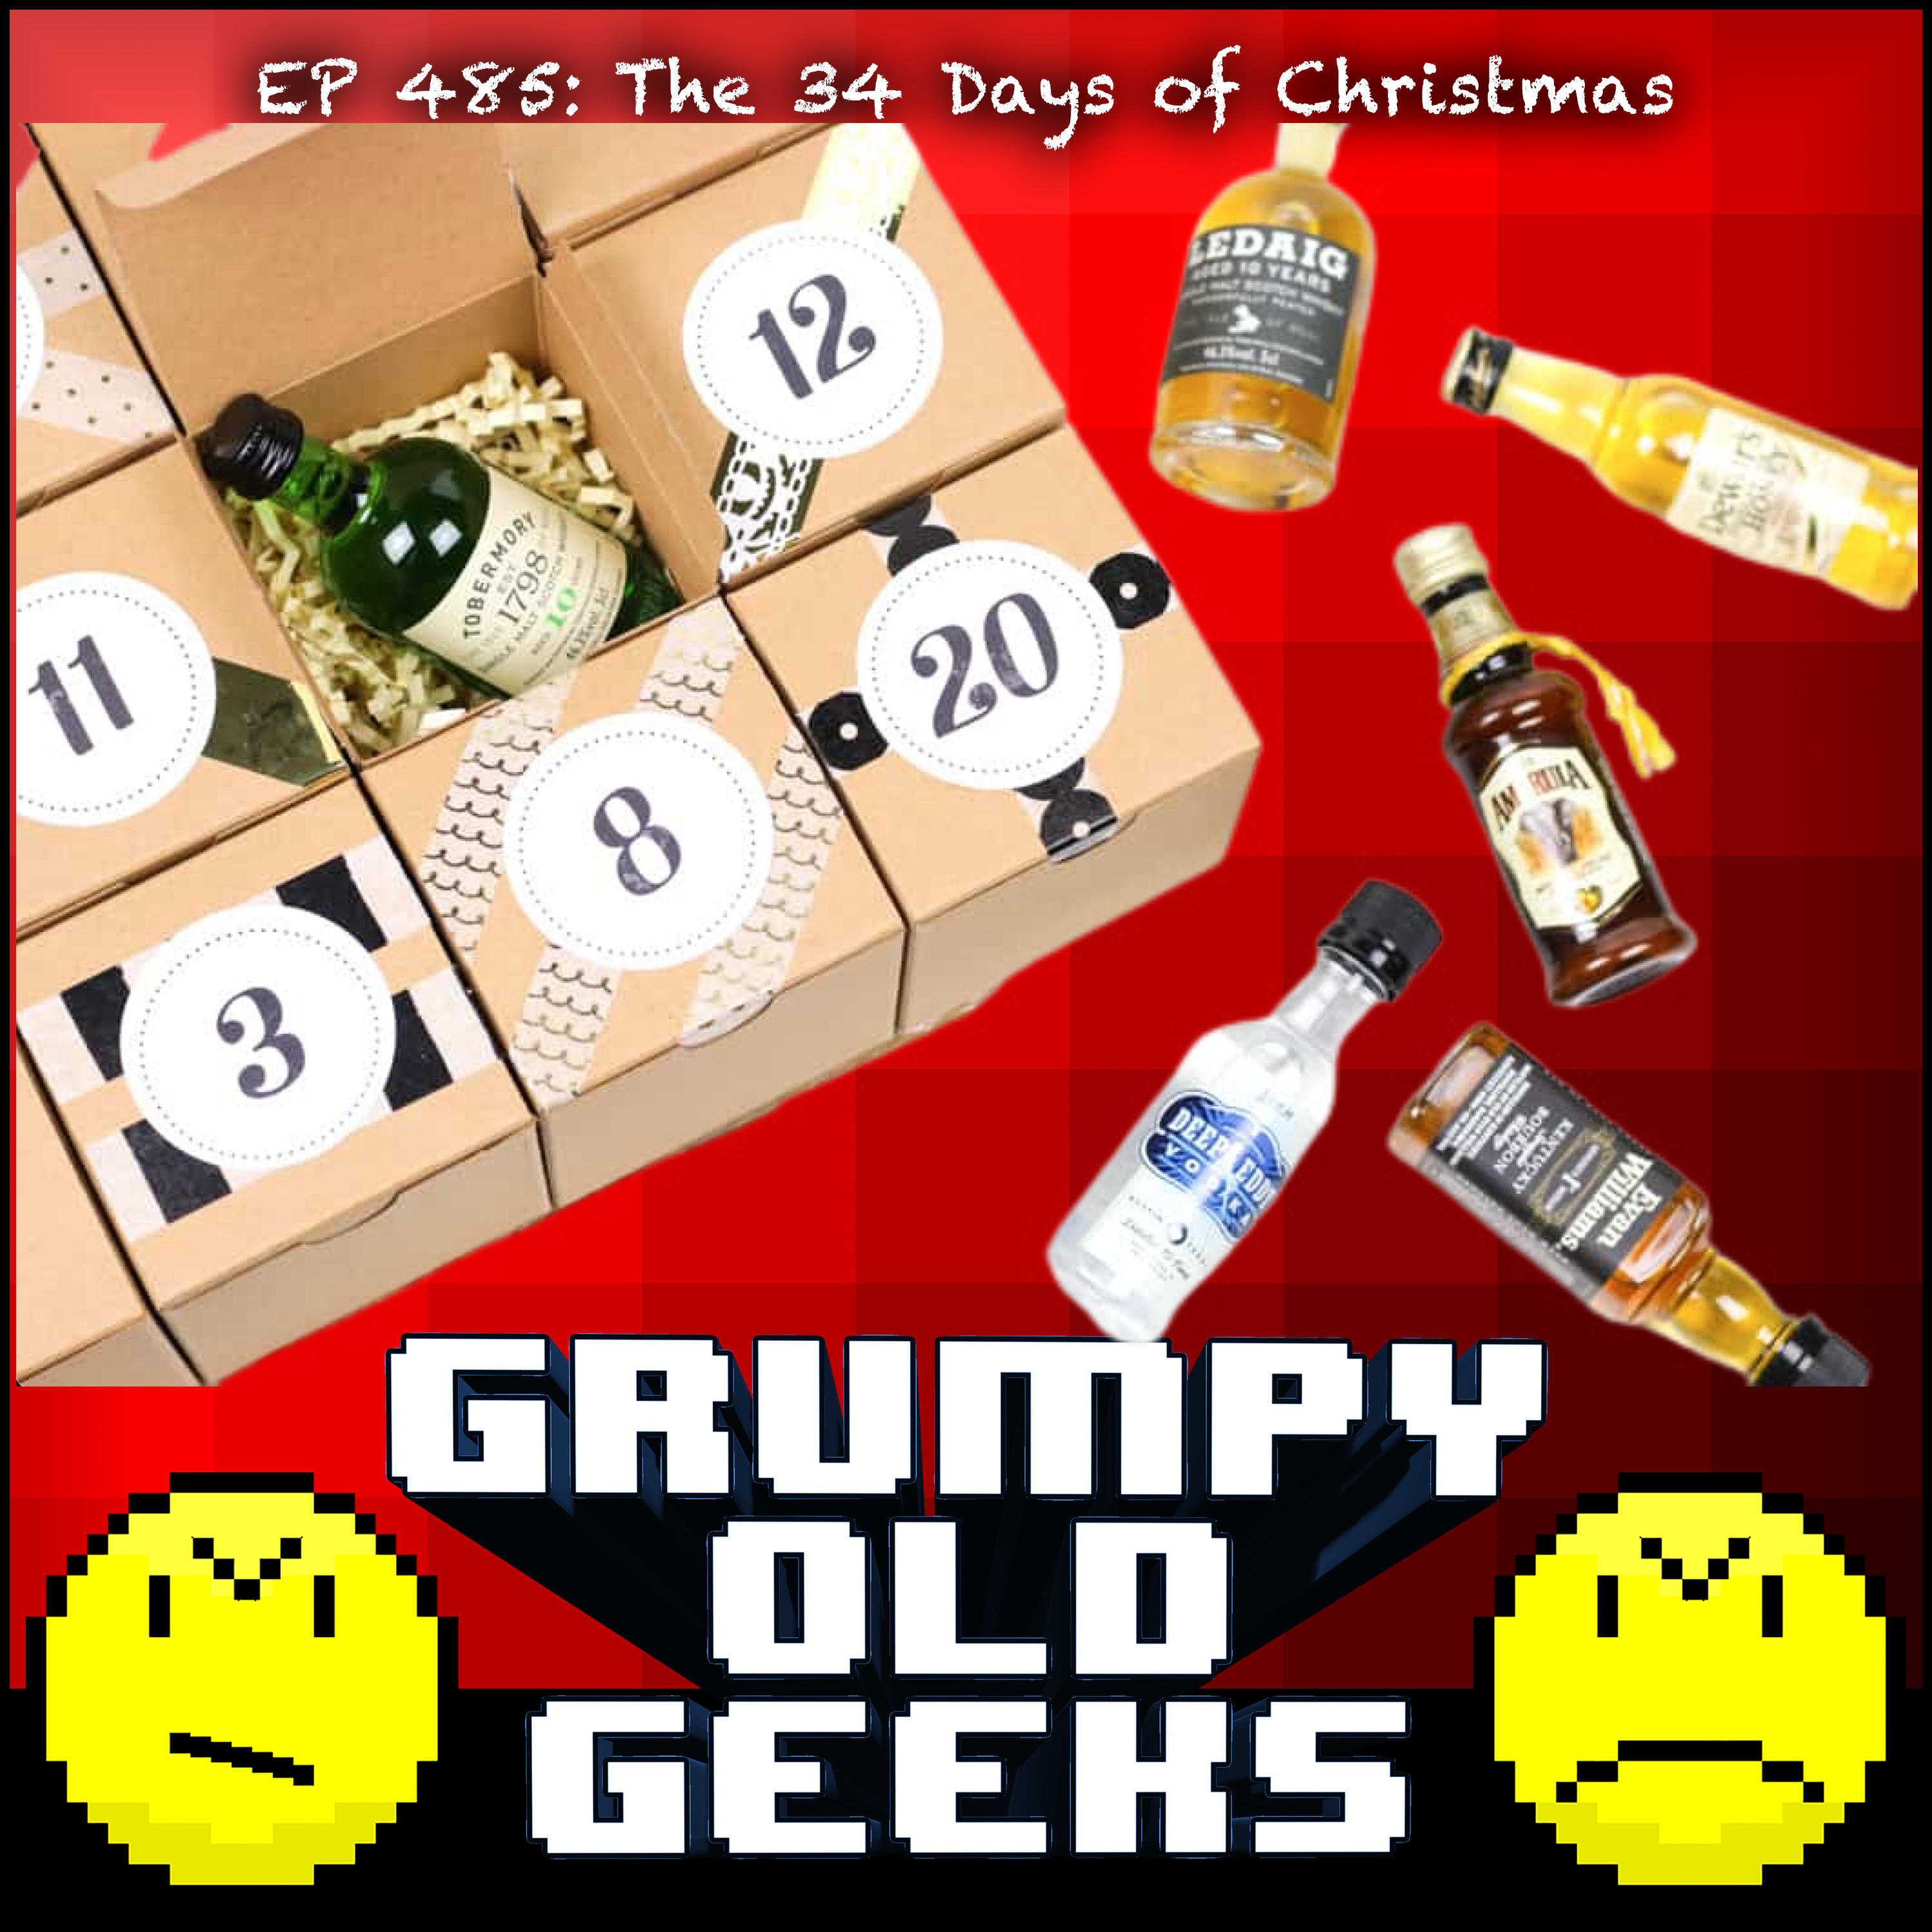 485: The 34 Days of Christmas